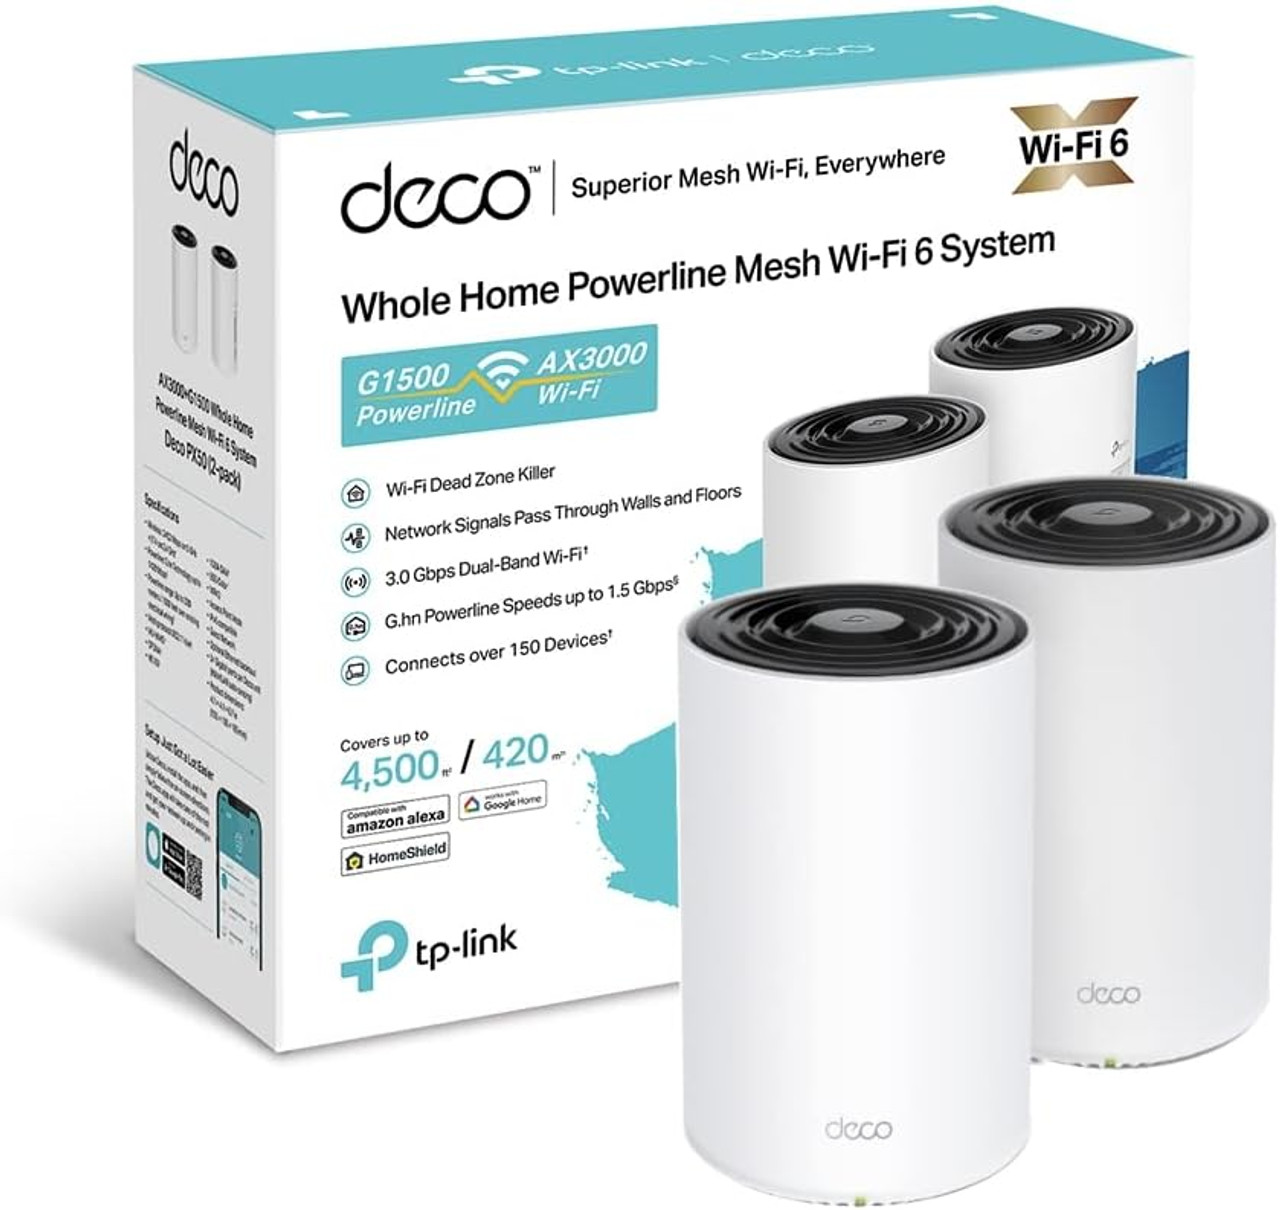 Deco X55, AX3000 Whole Home Mesh WiFi 6 System